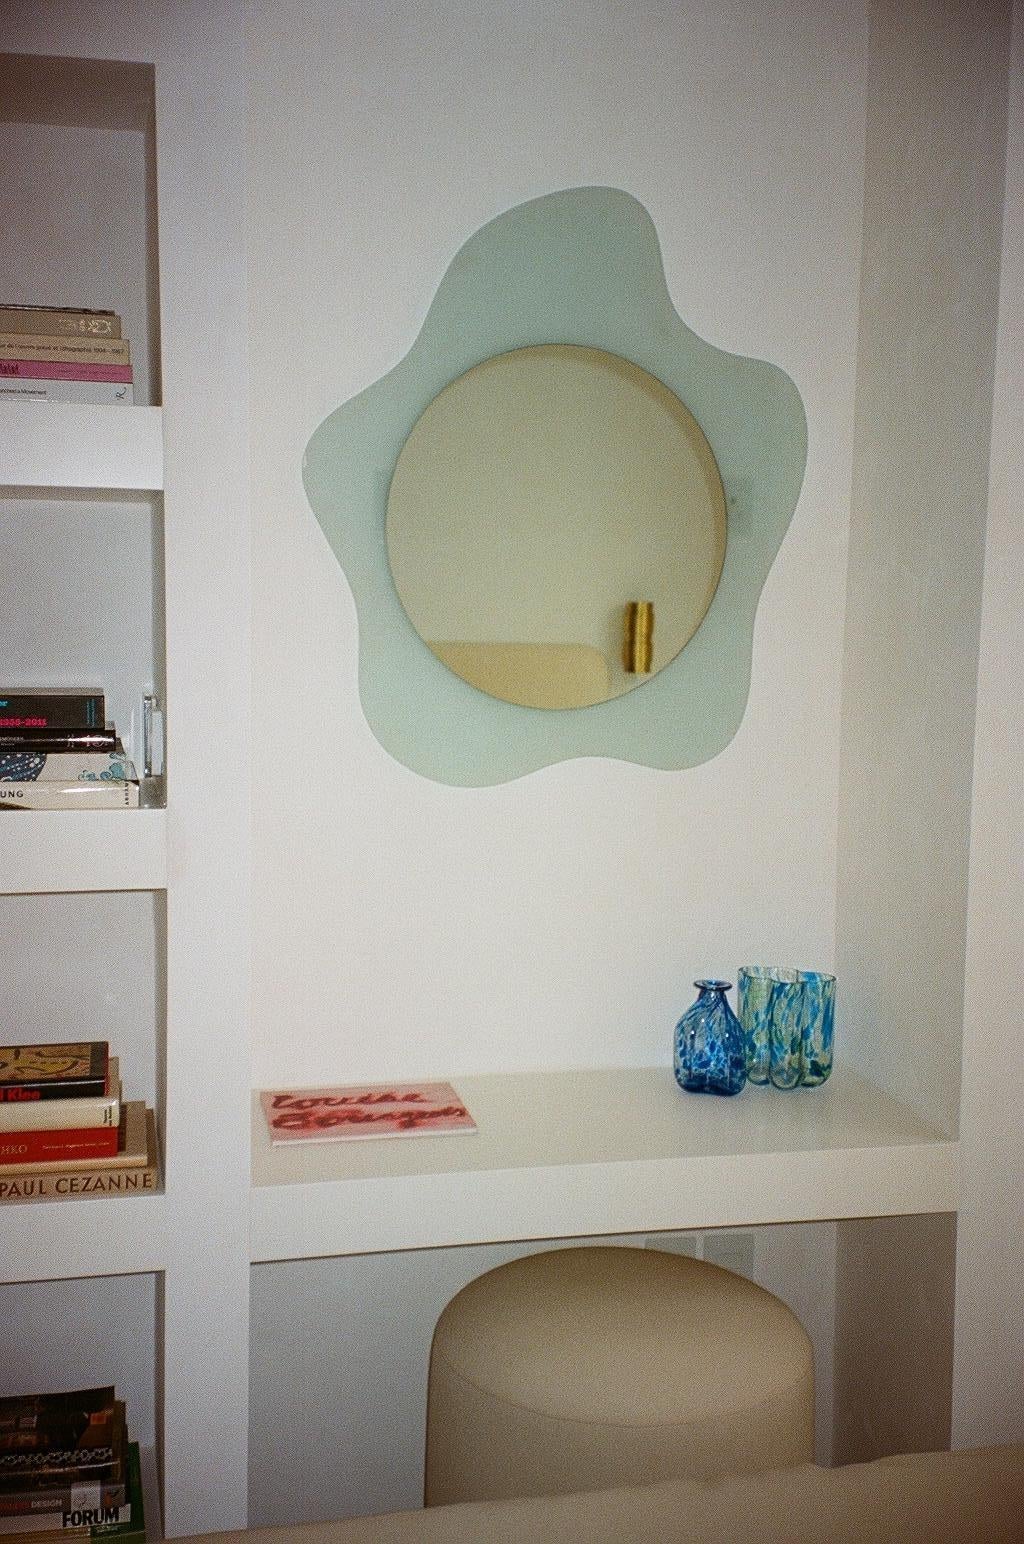 Italian wall mirror with blue crystal glass by Nando Vigo, 1980s.
Italian designer Nanda Vigo started her own atelier in Milan in 1959, and soon after began to exhibit her designs in many galleries and museums around Italy and Europe. She later